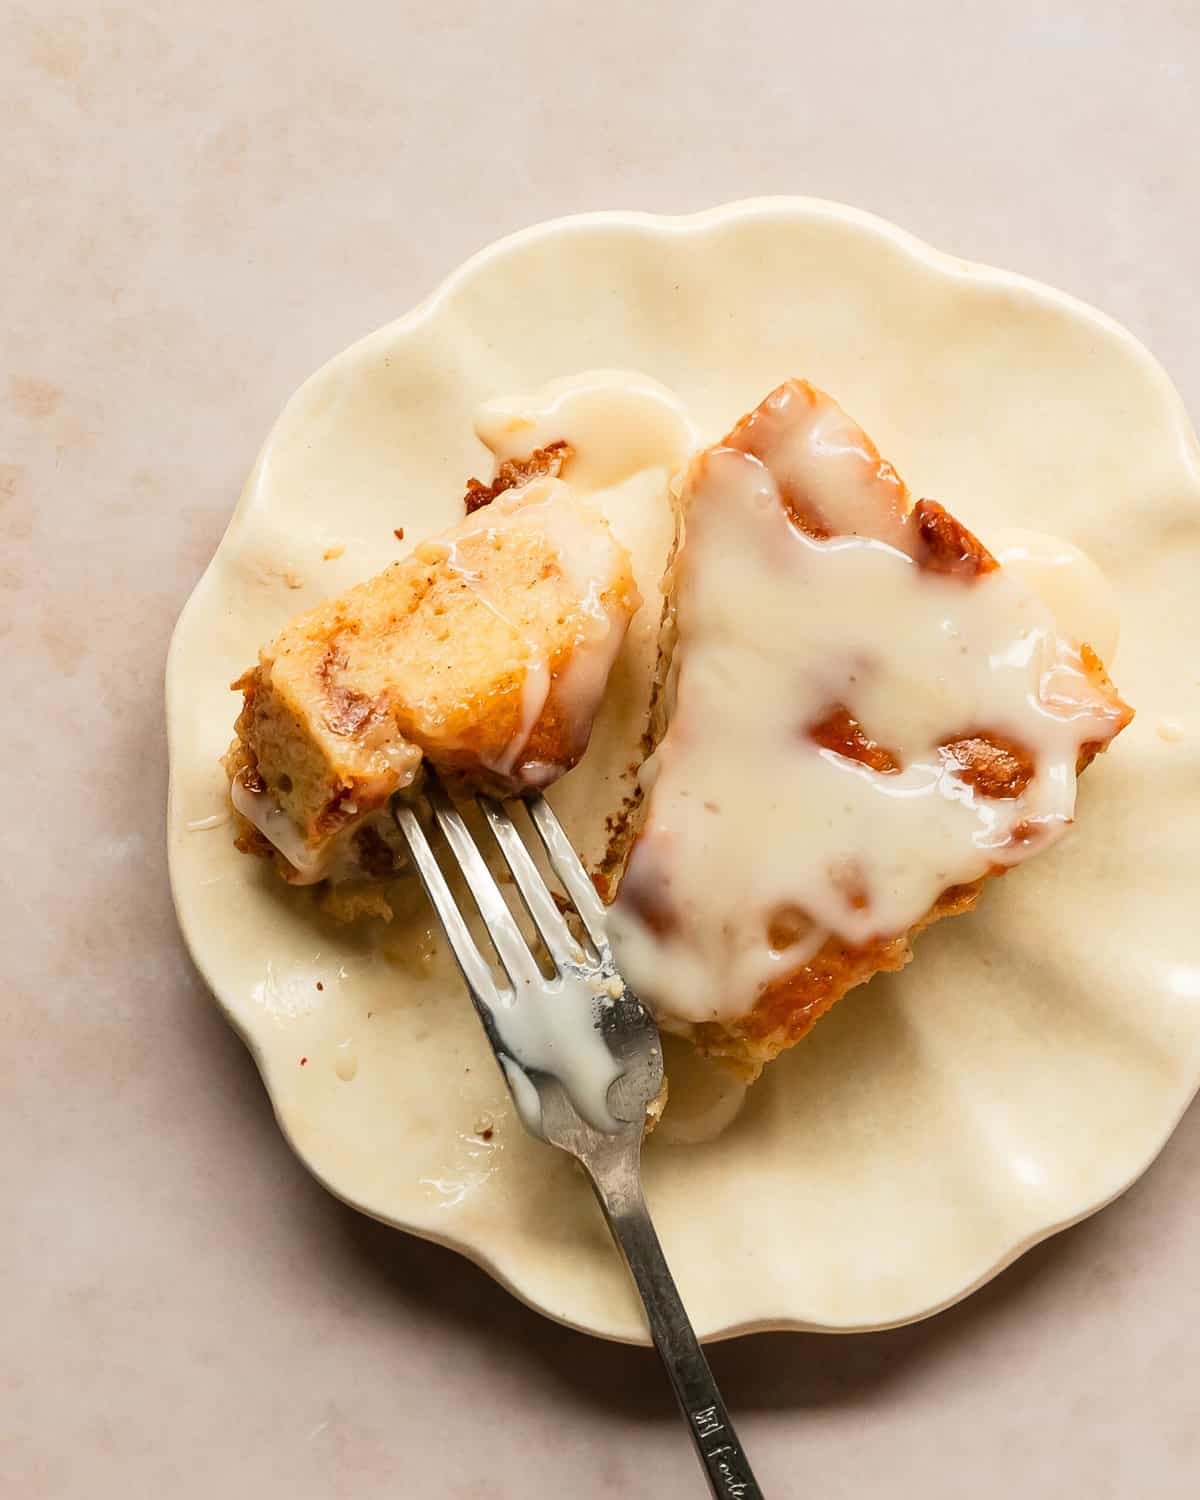 Bread pudding with vanilla sauce is a rich, baked custard and bread dessert, topped with a classic silky vanilla butter sauce right before serving. This quick and easy bread pudding makes the perfect weekend treat or a special holiday breakfast or dessert. 